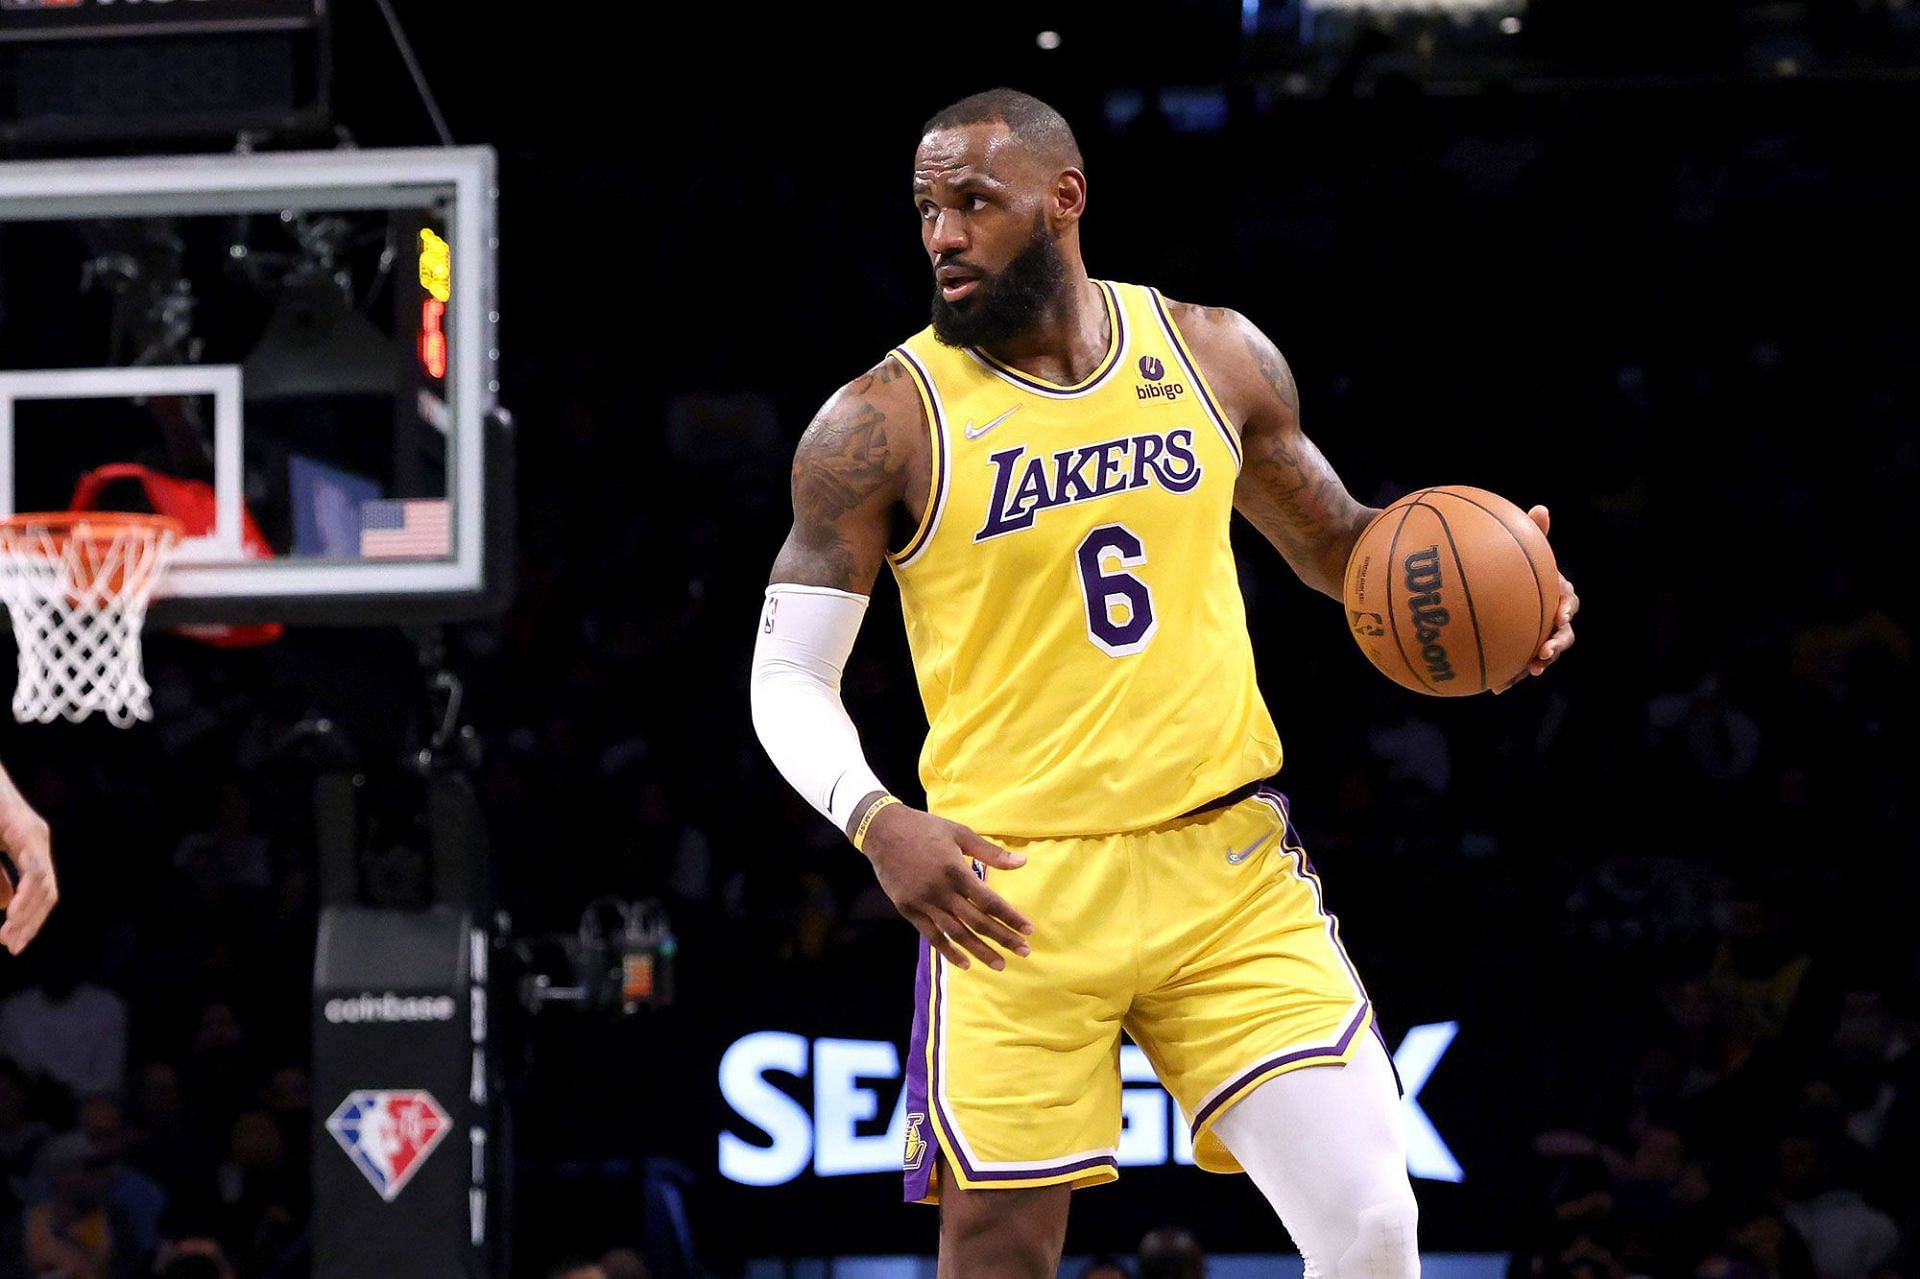 LeBron James could sign an extension if he sees the potential of another Lakers championship in the next two or three years. [Photo: New York Post]